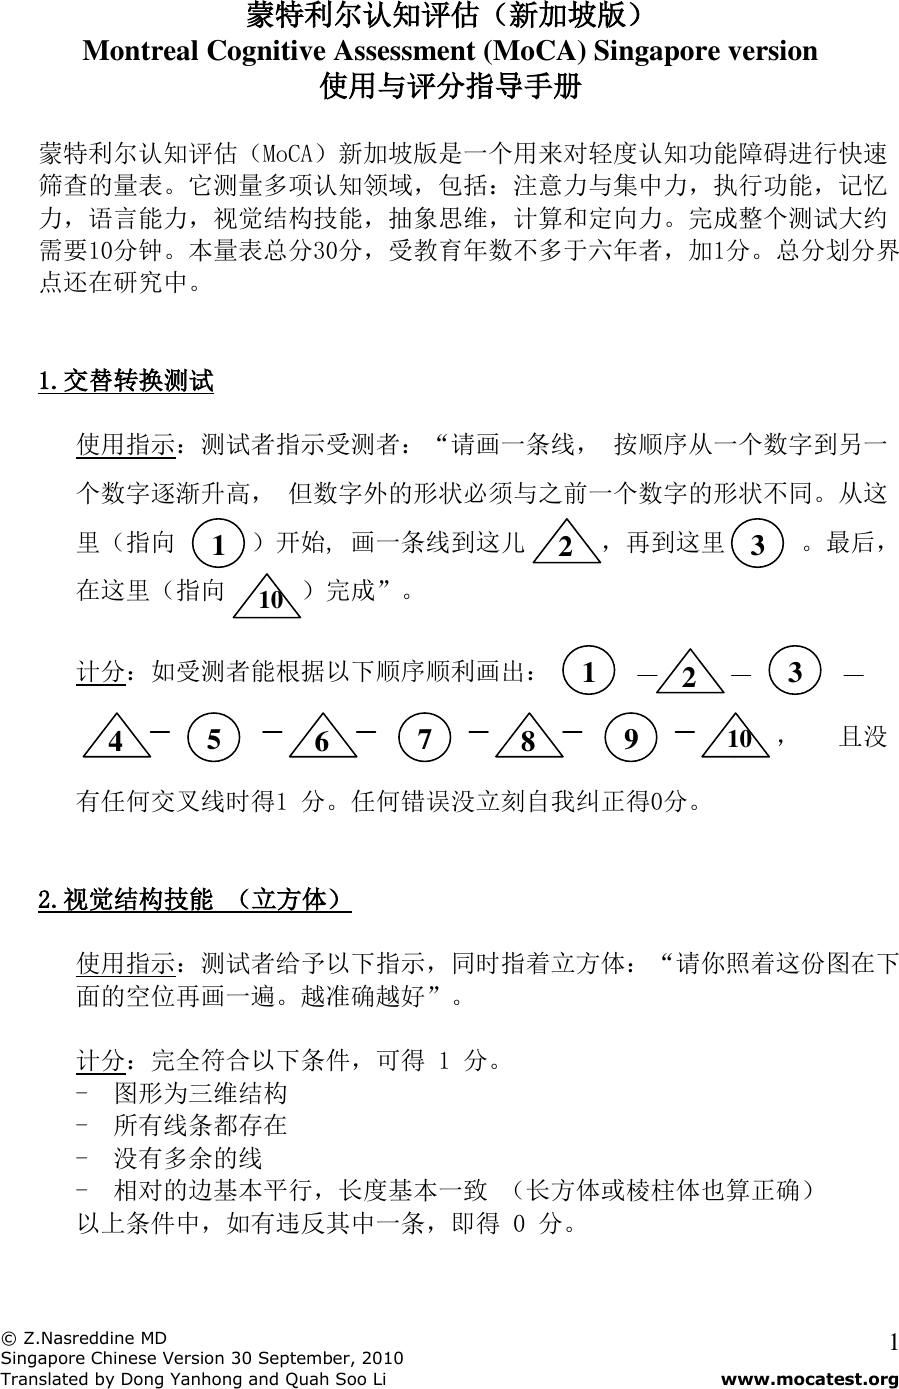 Page 1 of 5 - MOCA INSTRUCTIONS Mo CA-Instructions-Chinese Singapore